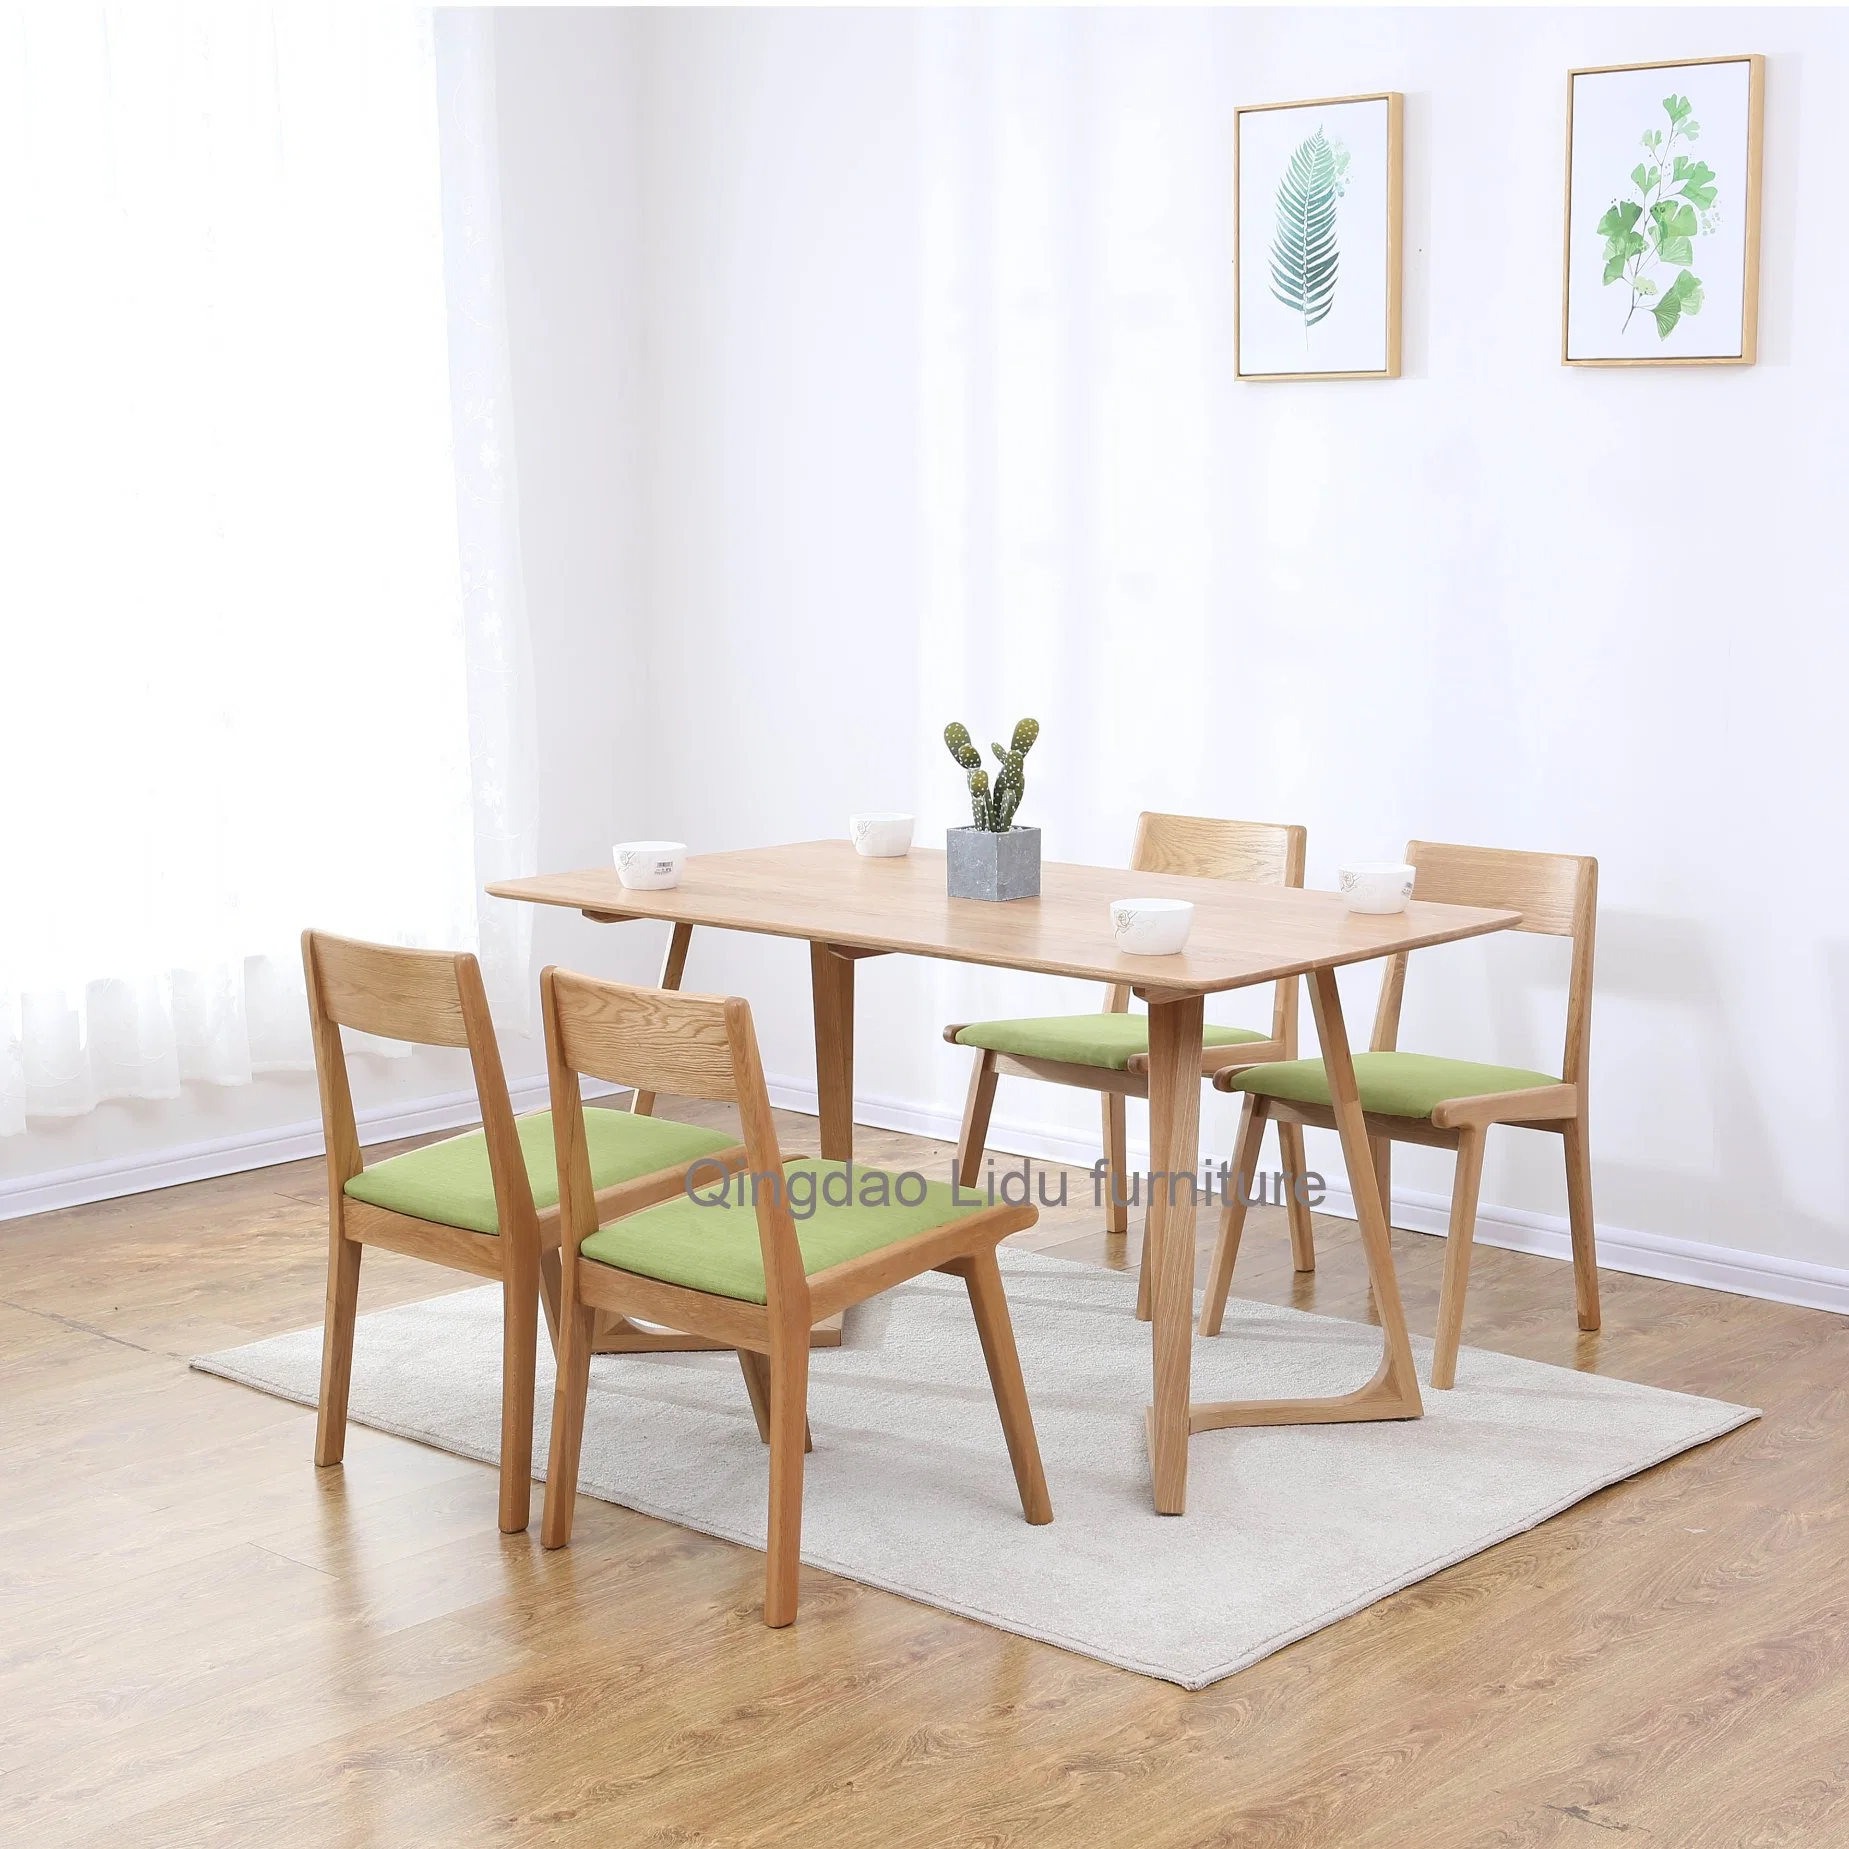 Wholesale Wooden Dining Table Set with 6 Upholstery Fabric Chairs Dining Chair Tables and Chairs for Restaurant